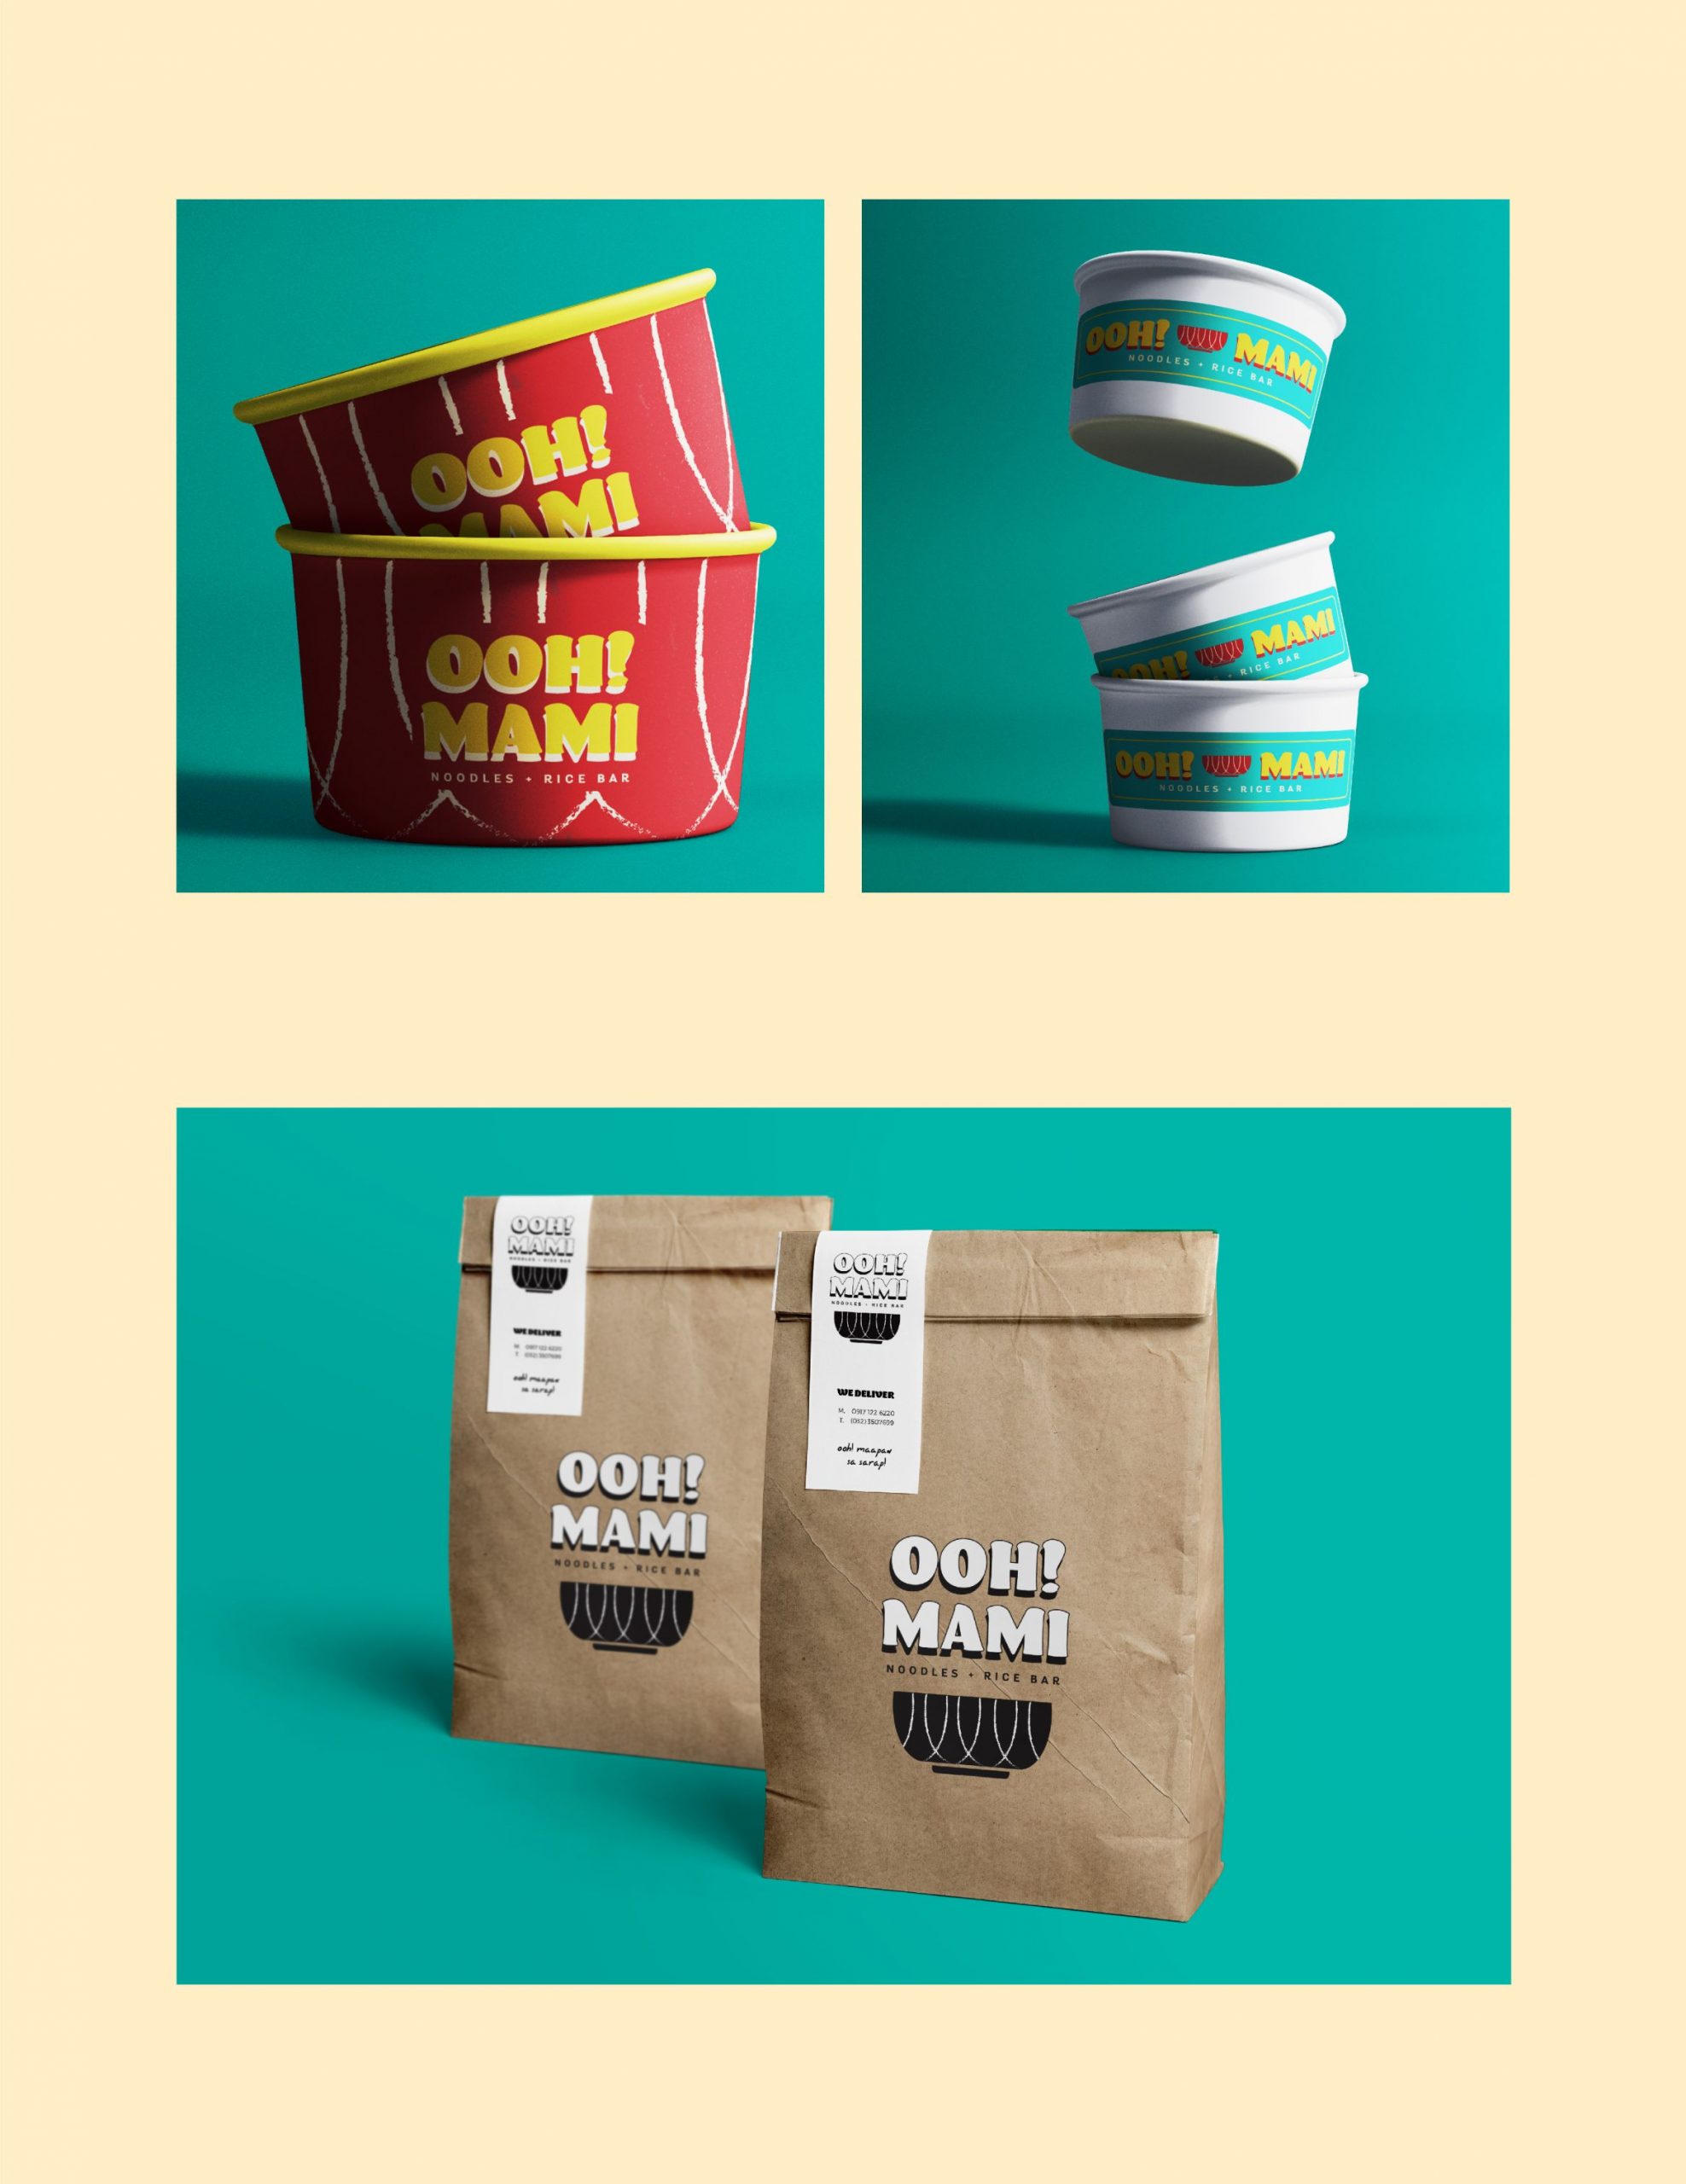 Images of the Food packaging in bowl and take out bahs